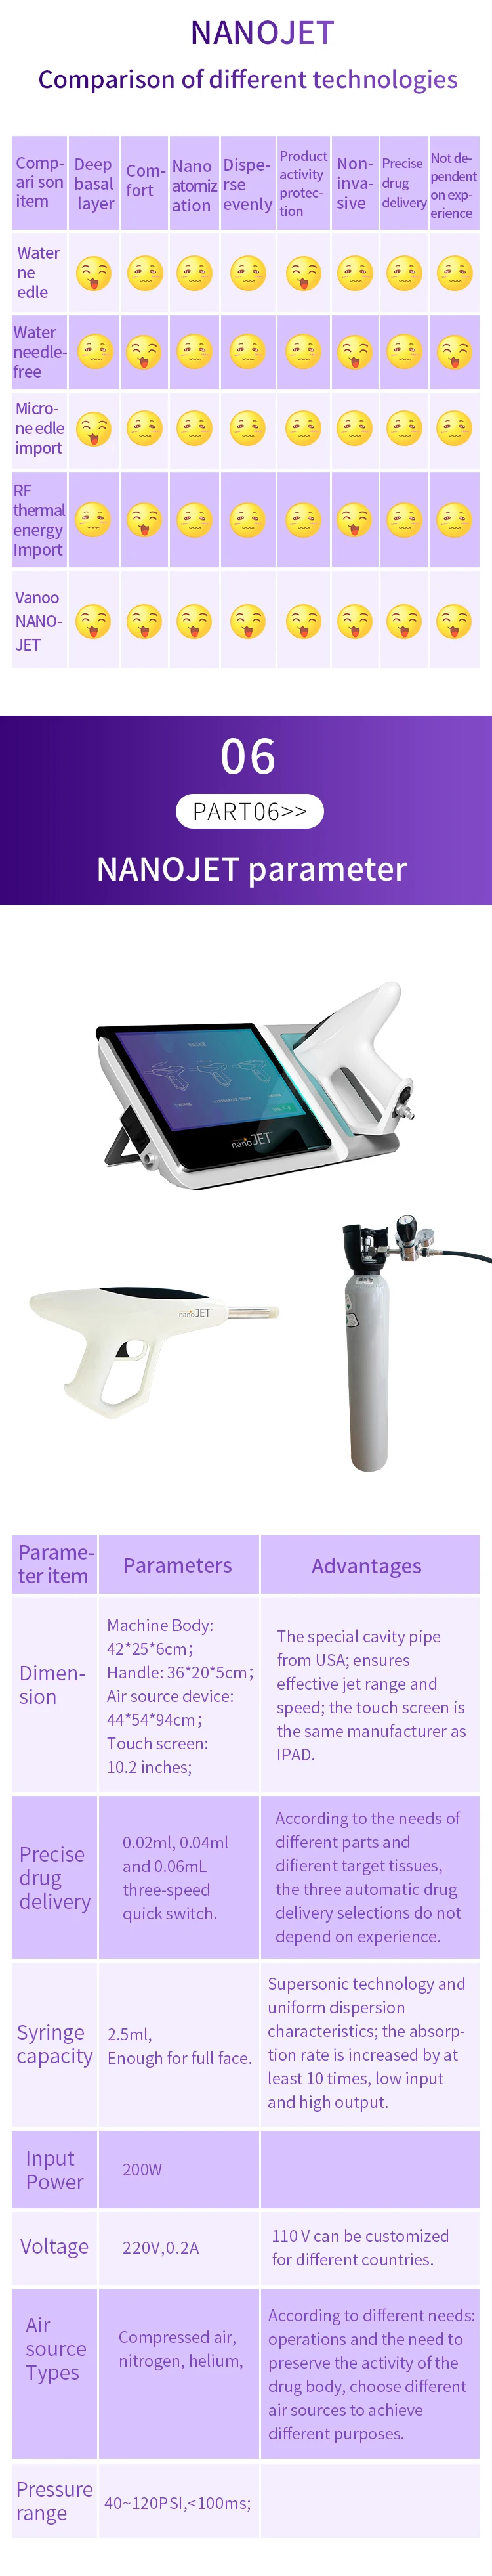 jet peel my jet Mesotherapy  gun No Needle  non-invasive  delivery system  for HA , Ampoule, Meso products